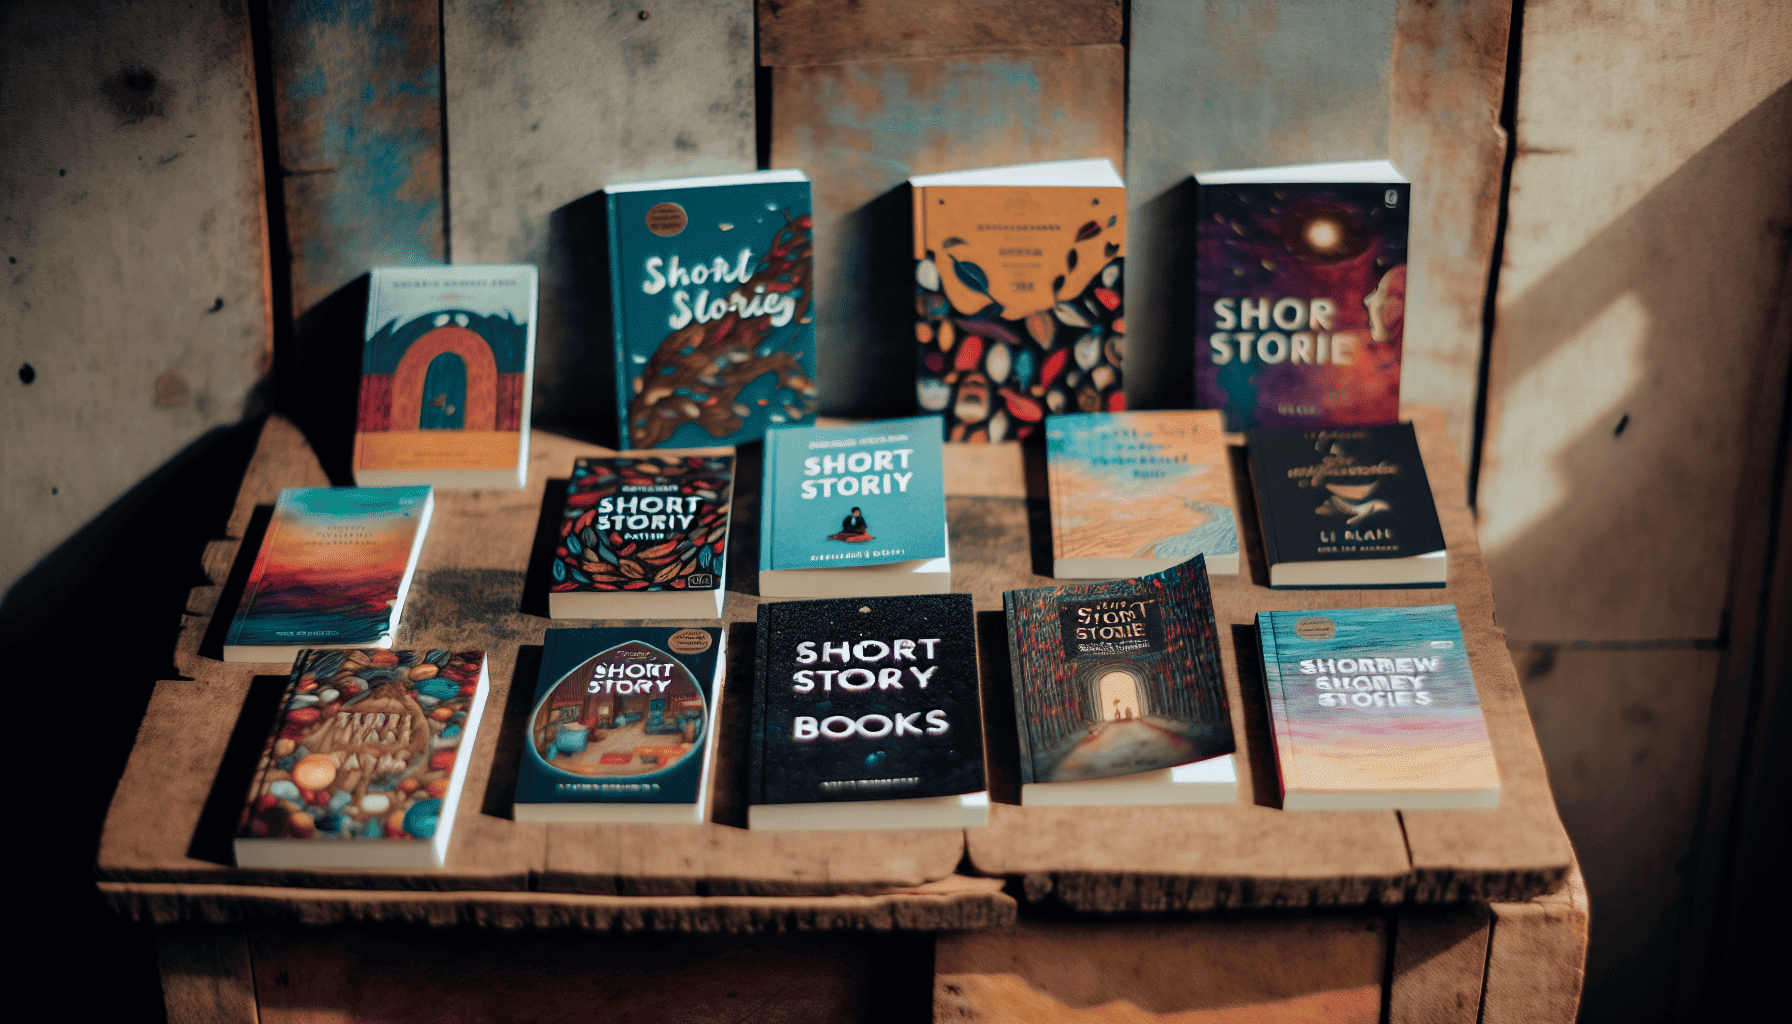 A collection of short story books arranged creatively